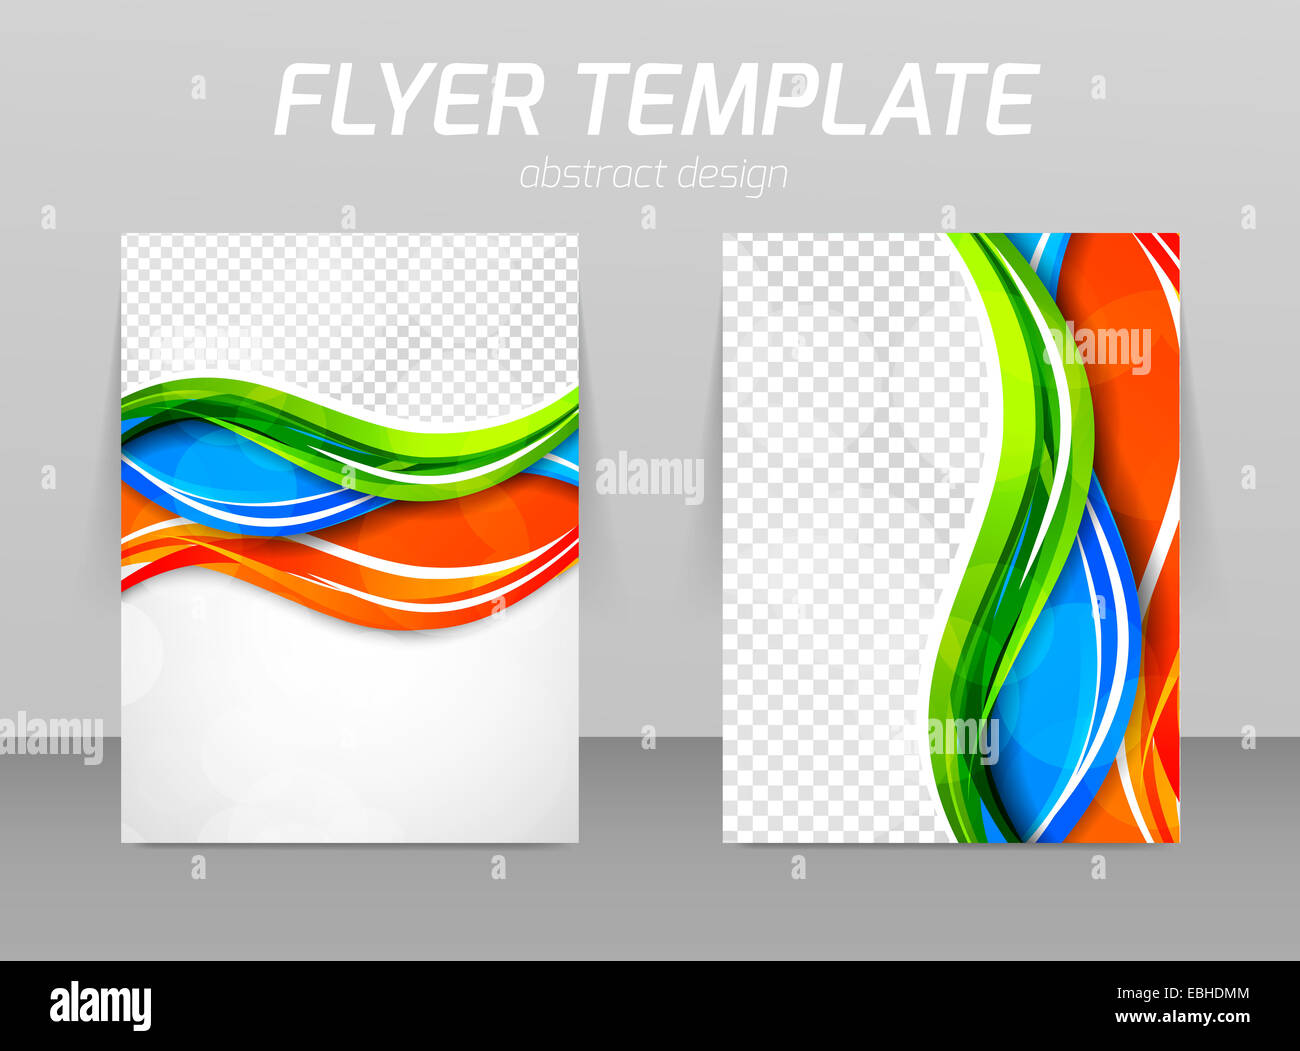 Abstract flyer template design in green blue green color Stock Photo